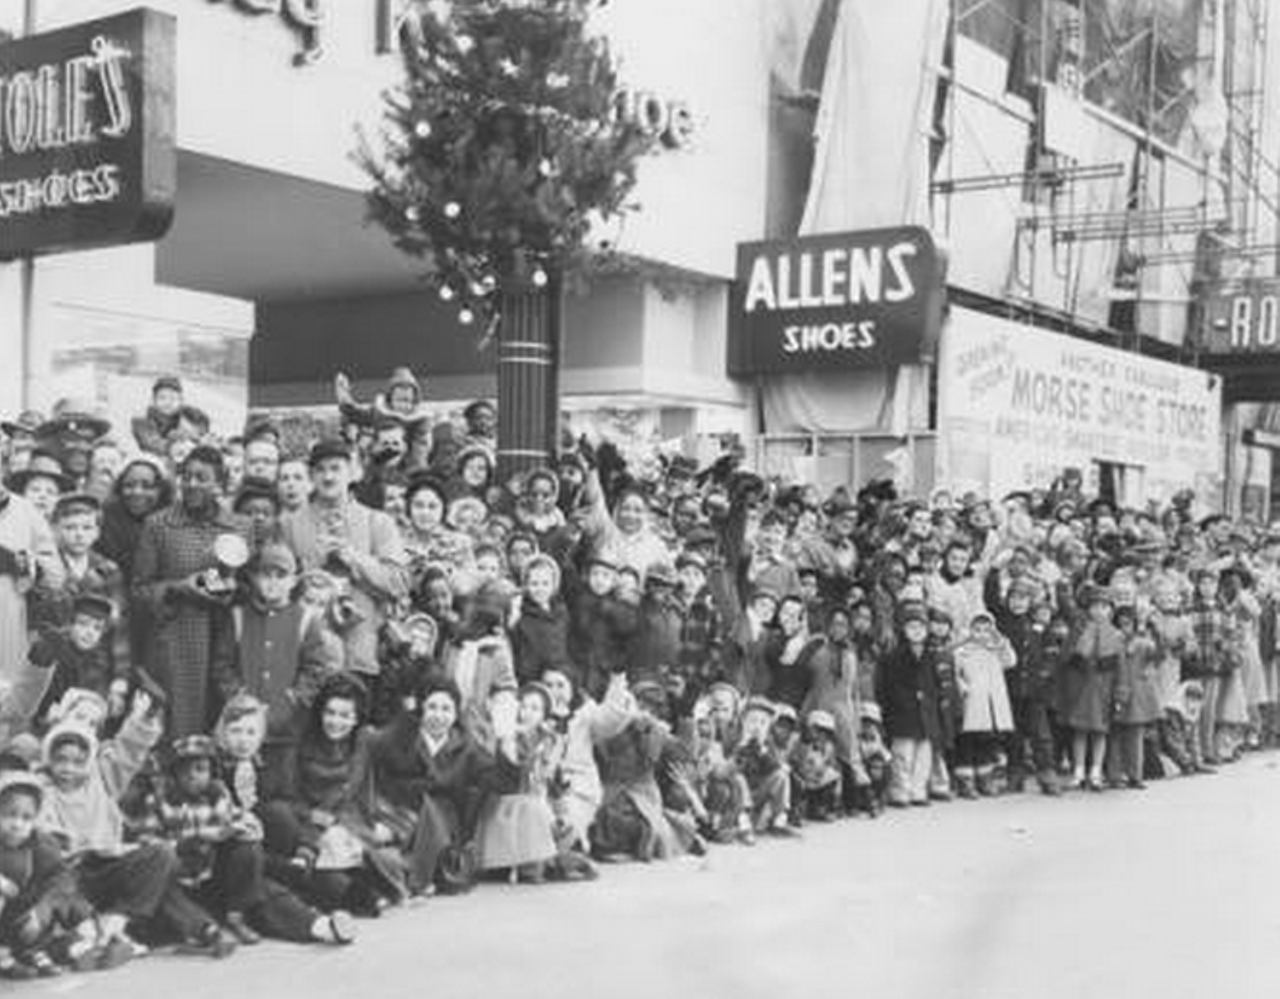 A crowd gathers for the Cleveland Christmas parade on E. 6th. and Euclid Ave., 1955.